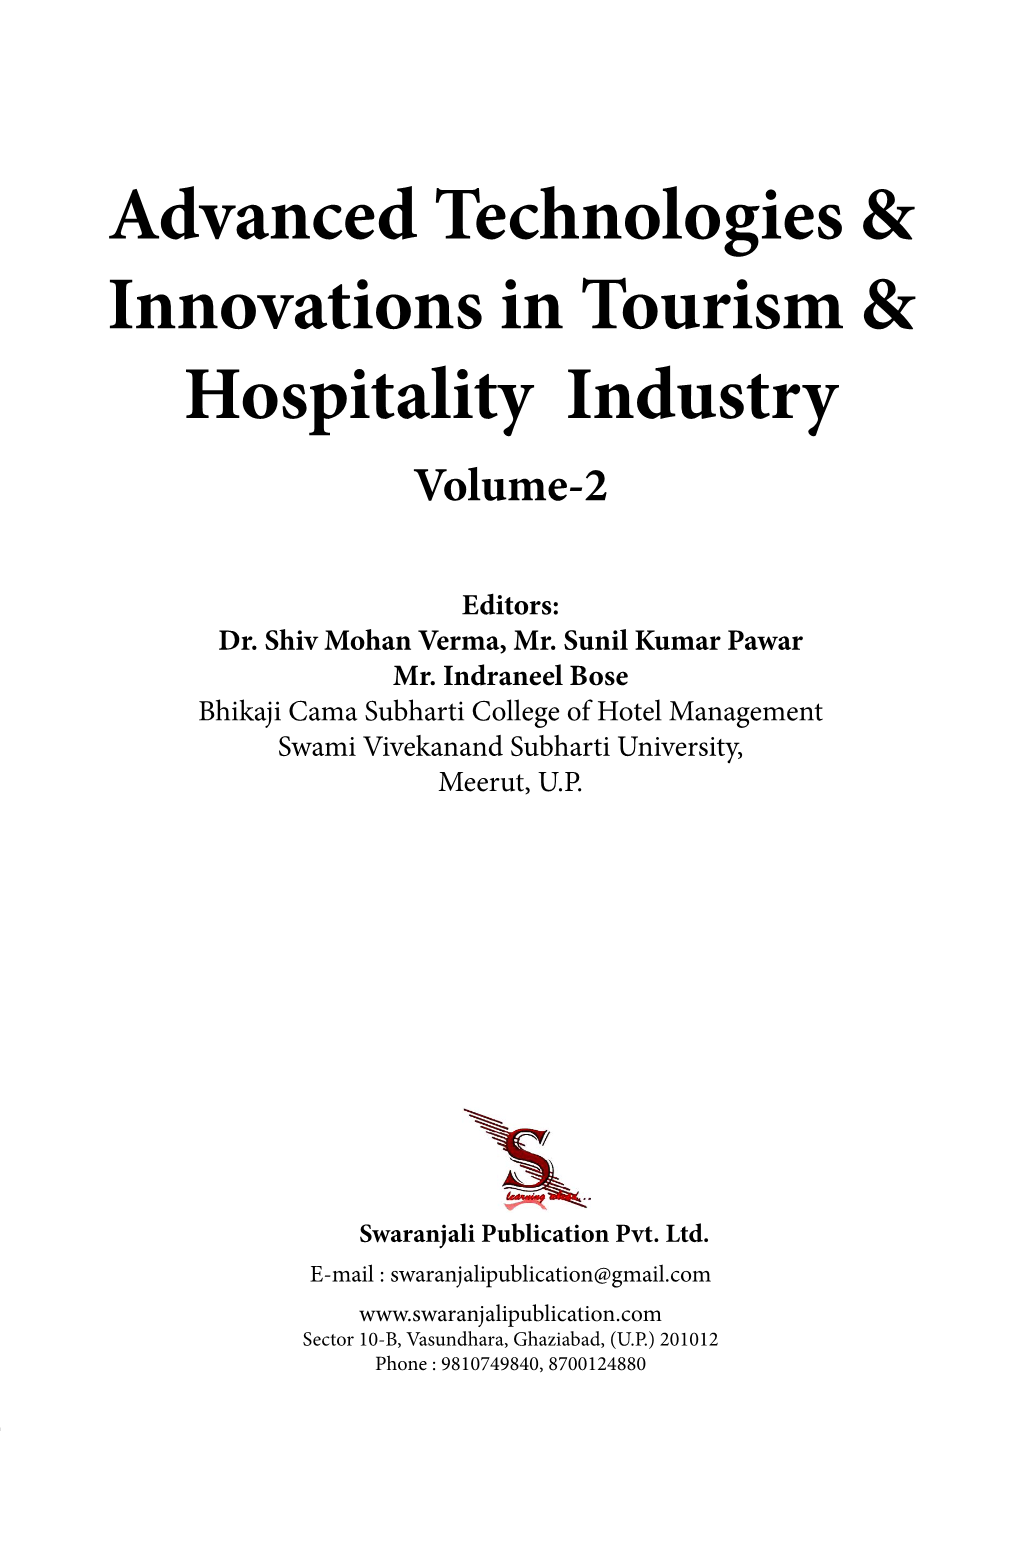 Advanced Technologies & Innovations in Tourism & Hospitality Industry